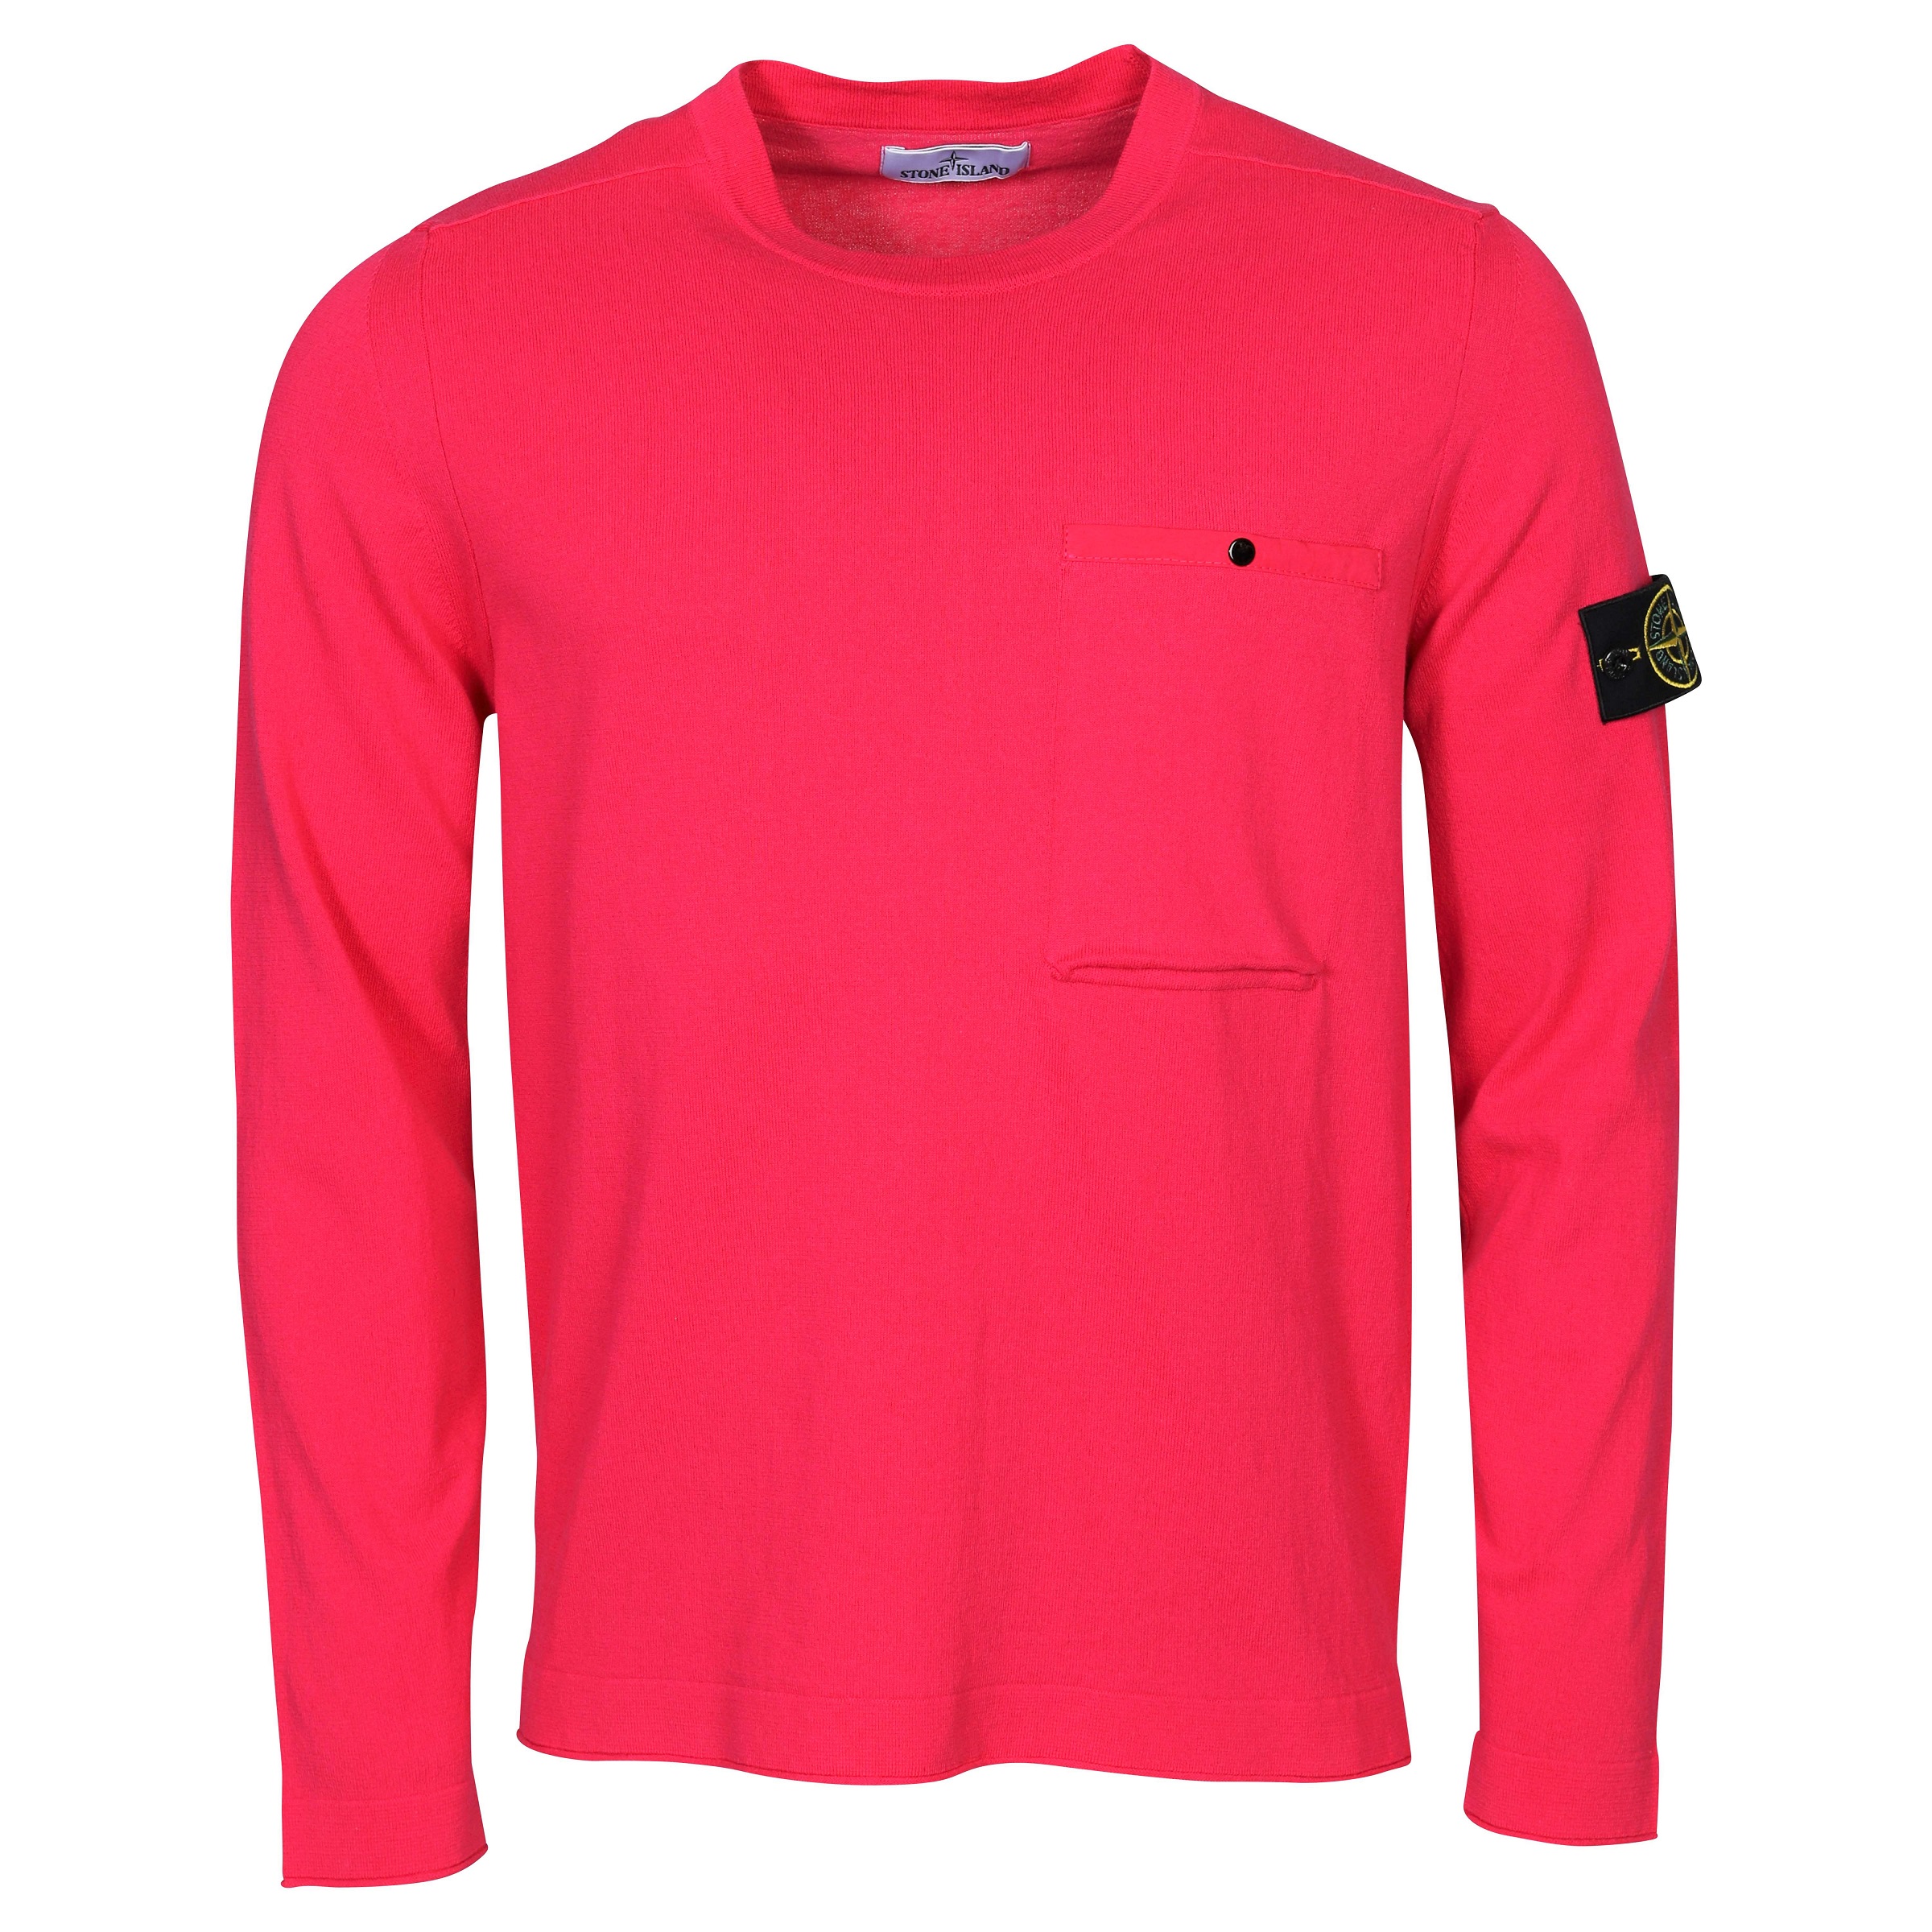 Stone Island Chest Pocket Knit Sweater in Pink M